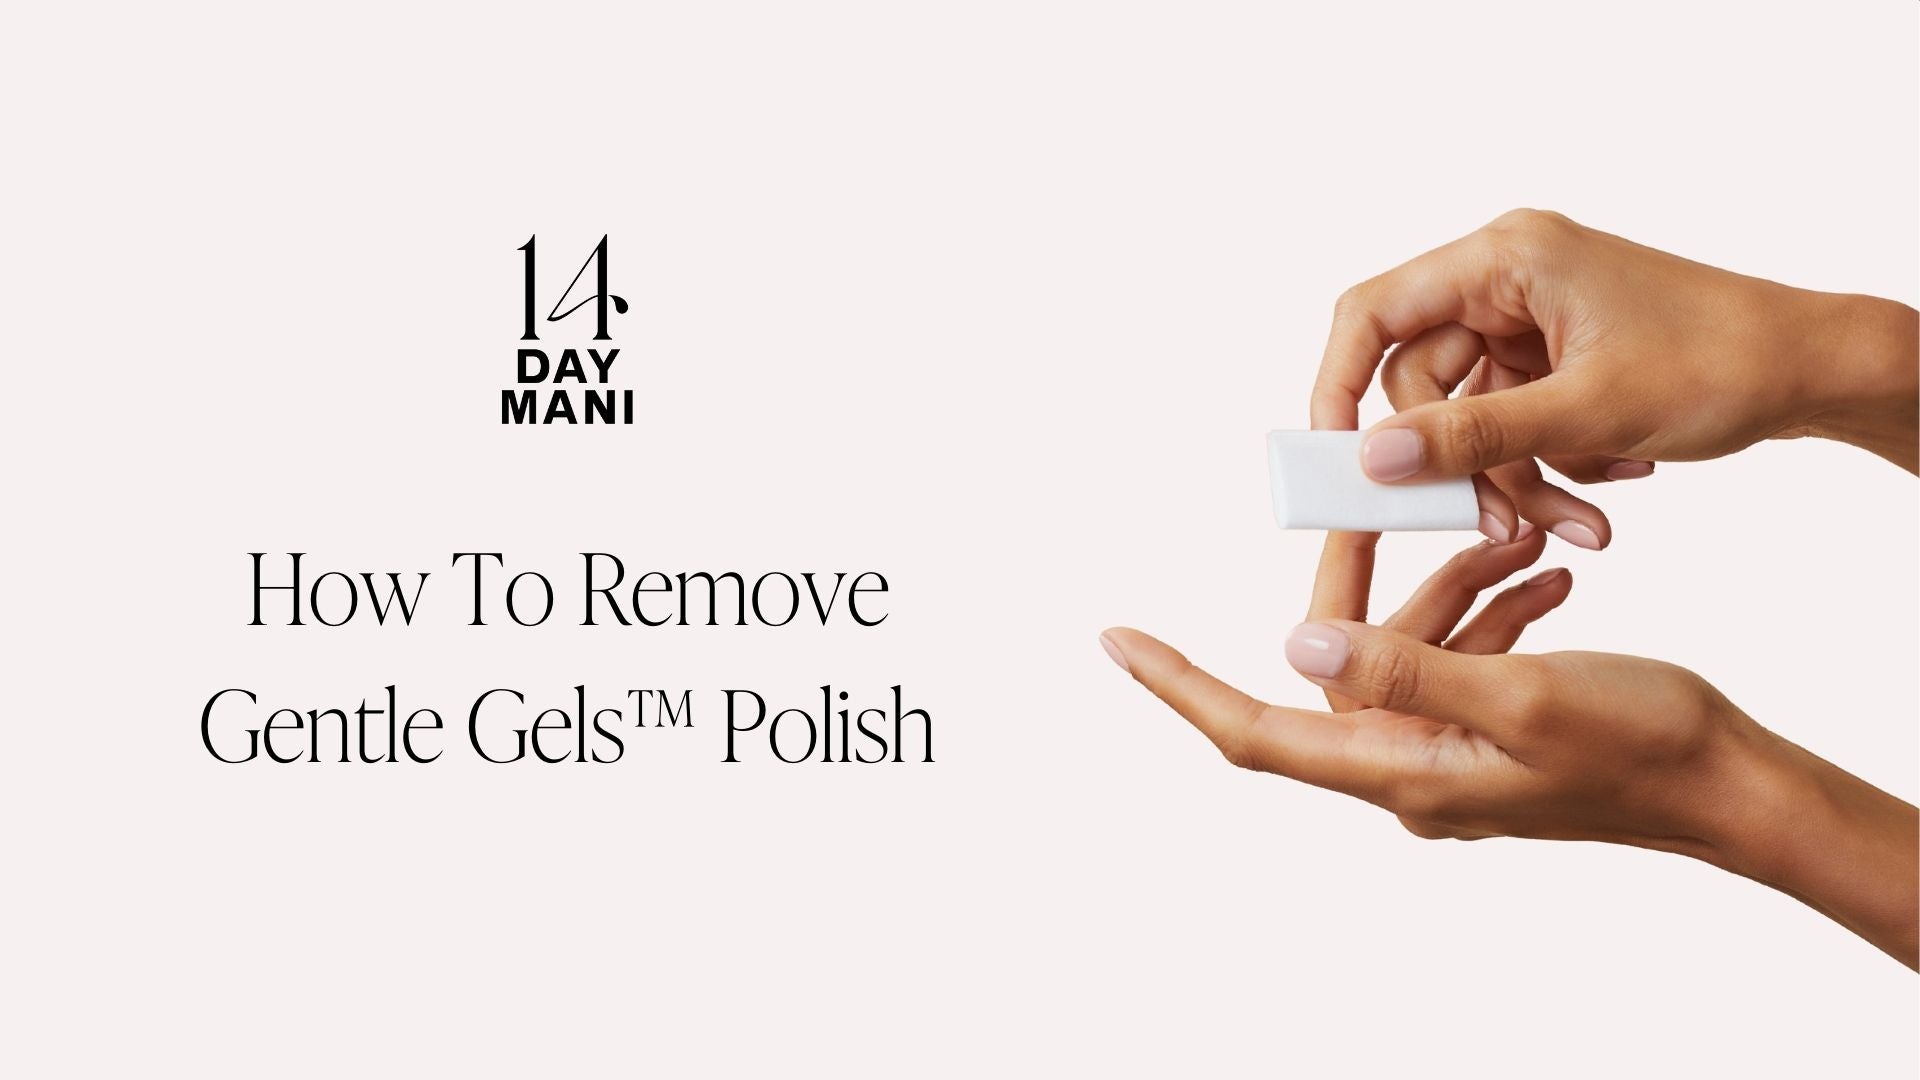 Load video: HOW TO REMOVE GENTLE GELS™ POLISH